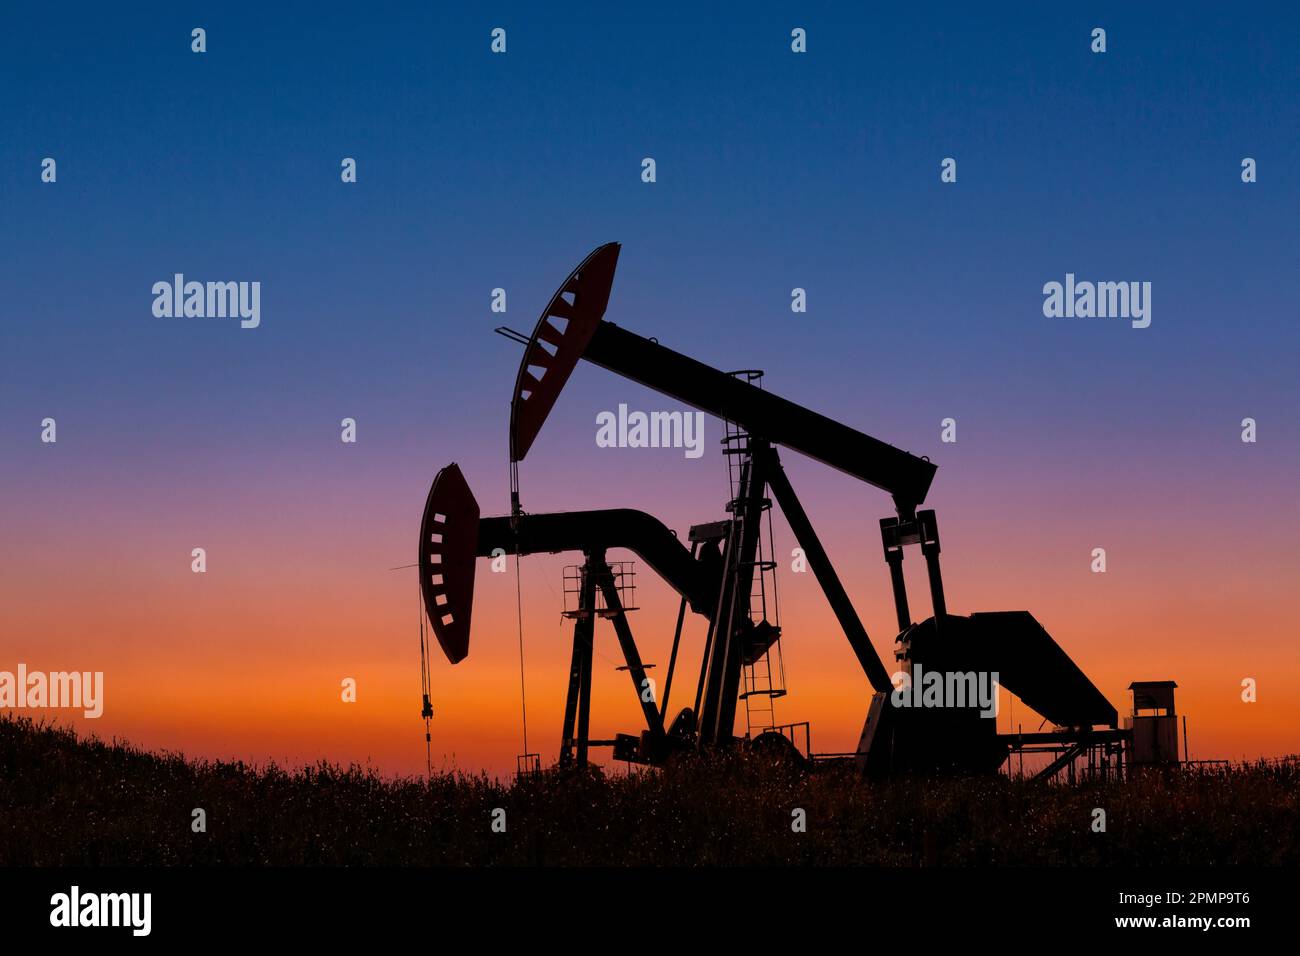 Silhouette of two pumpjacks at sunrise with glowing sky in the background, West of Airdrie; Alberta, Canada Stock Photo